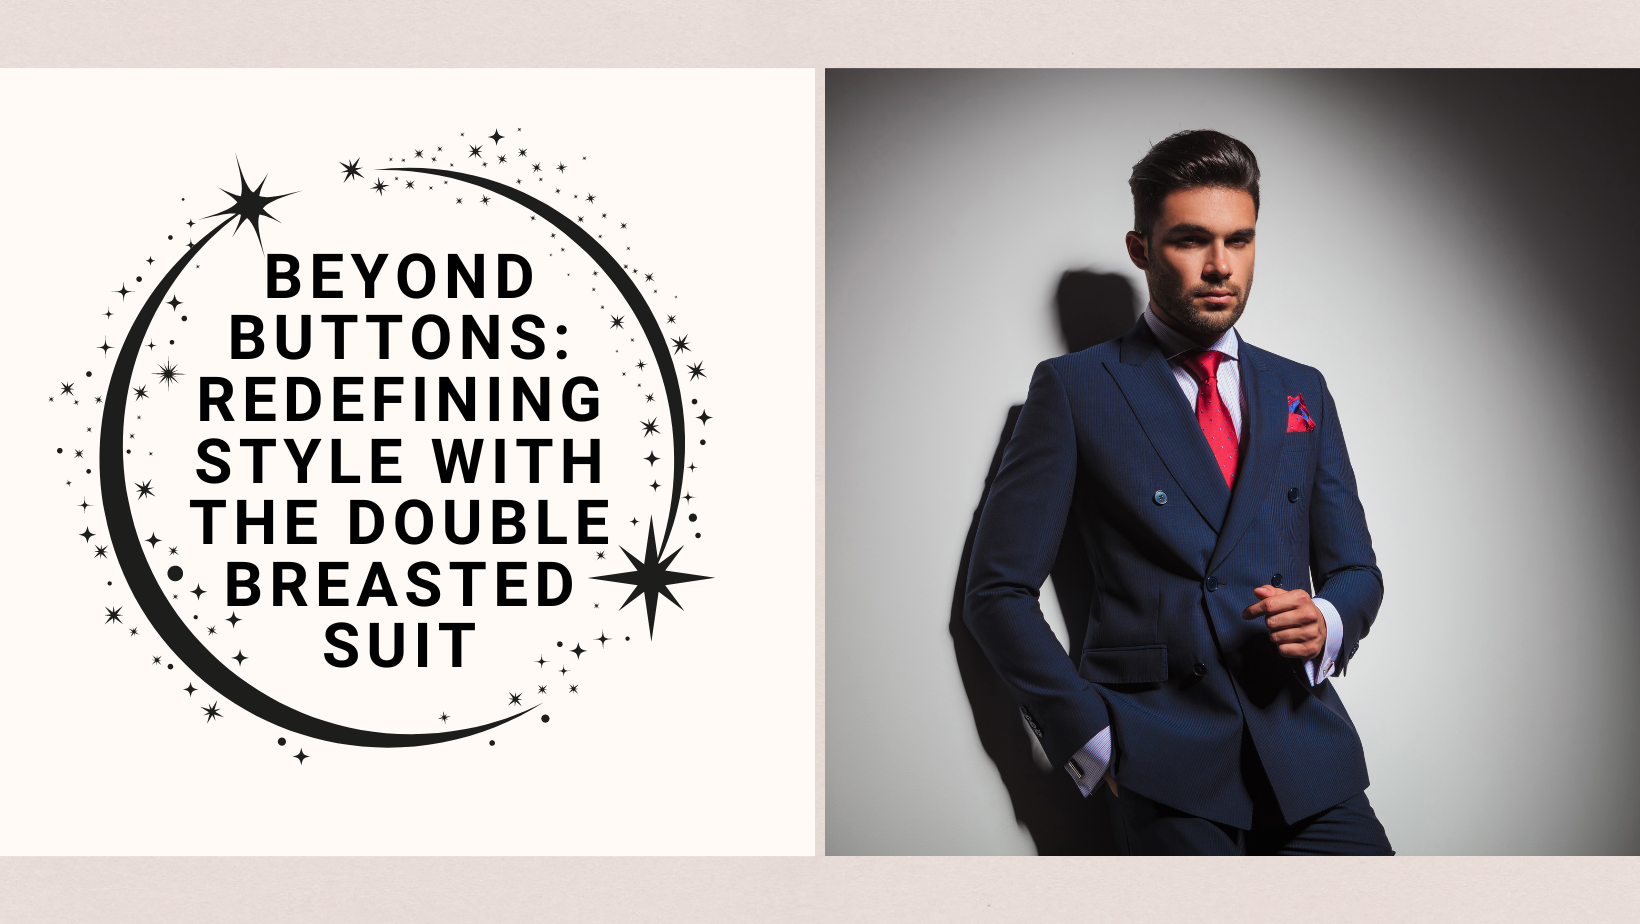 Beyond Buttons: Redefining Style with the Double Breasted Suit